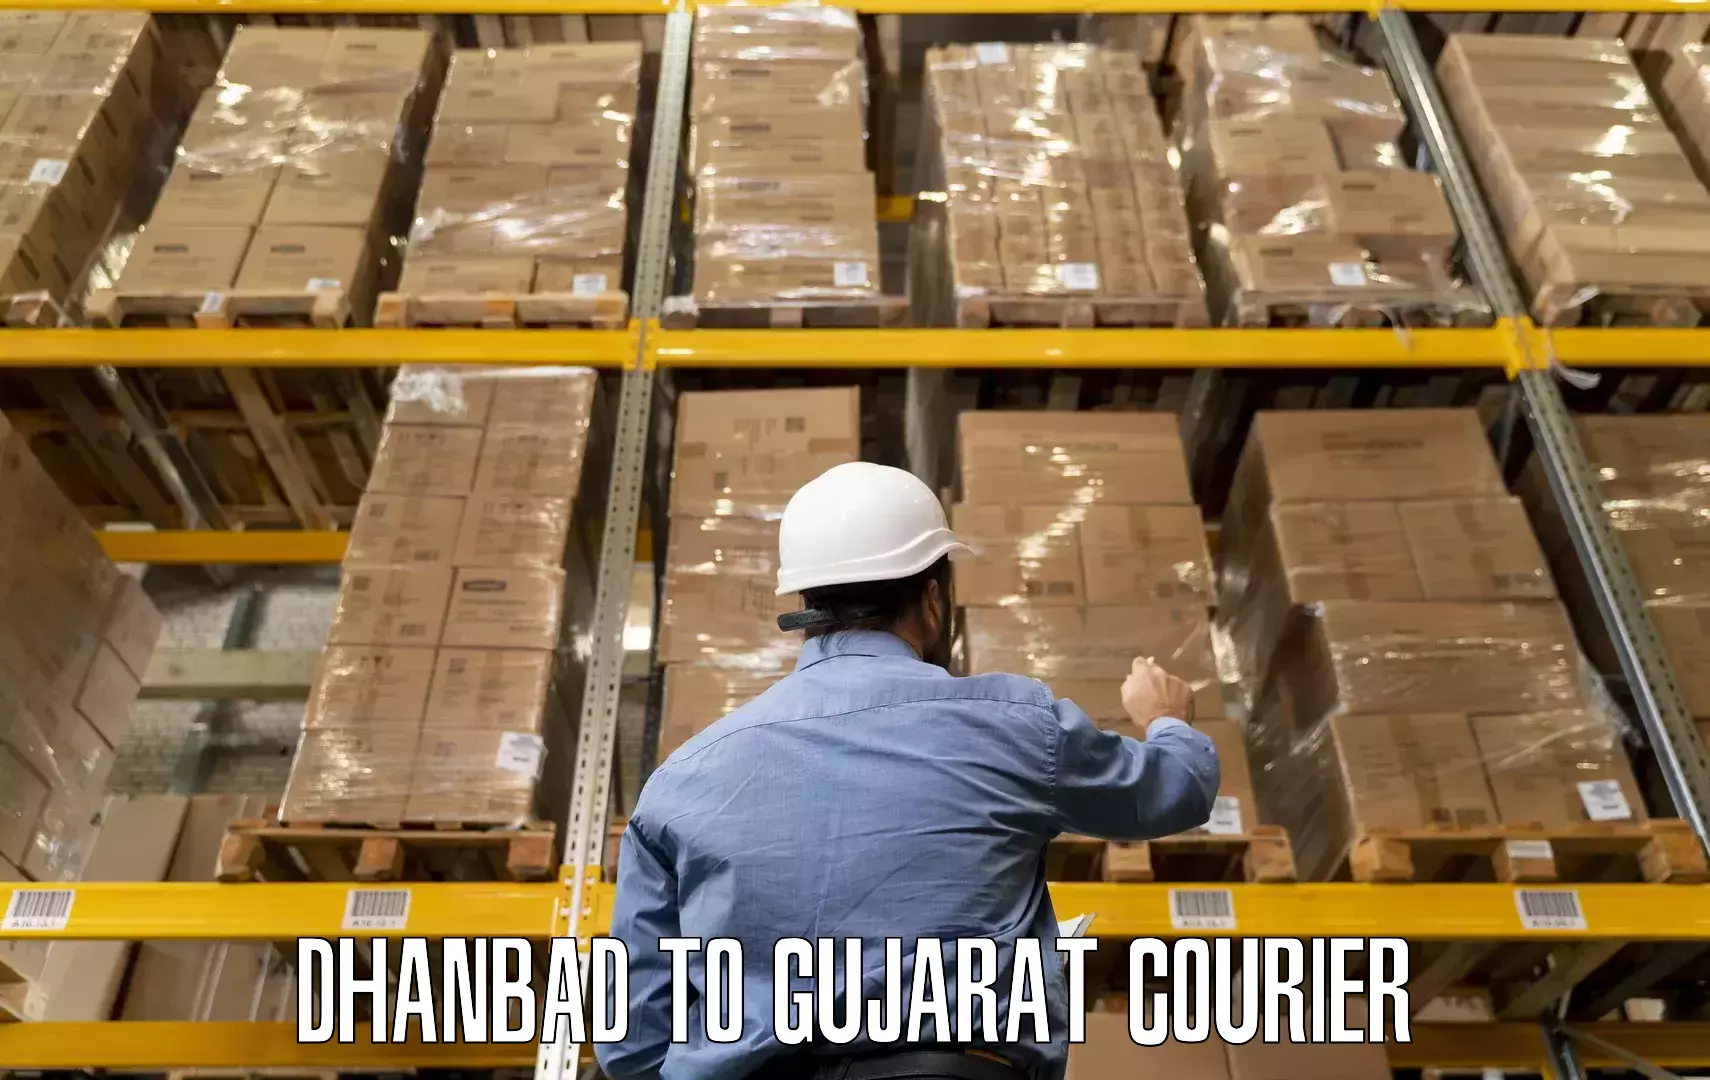 Furniture delivery service Dhanbad to Chotila